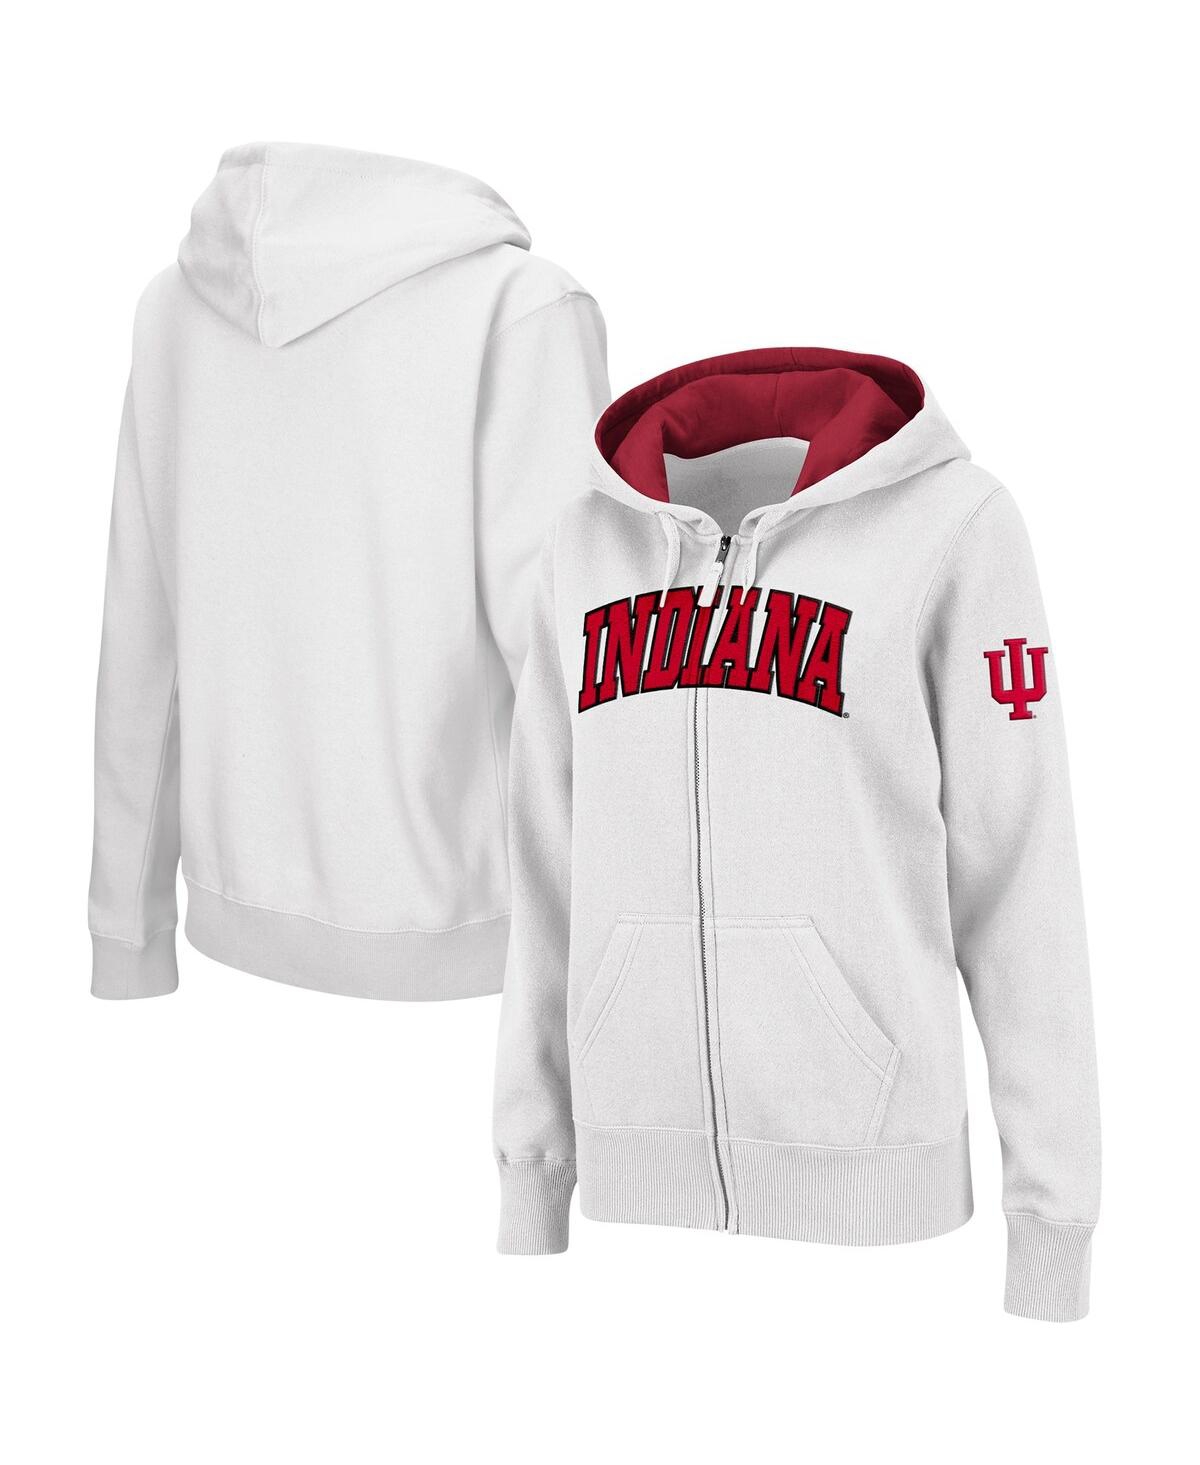 Shop Colosseum Women's  White Indiana Hoosiers Arched Name Full-zip Hoodie